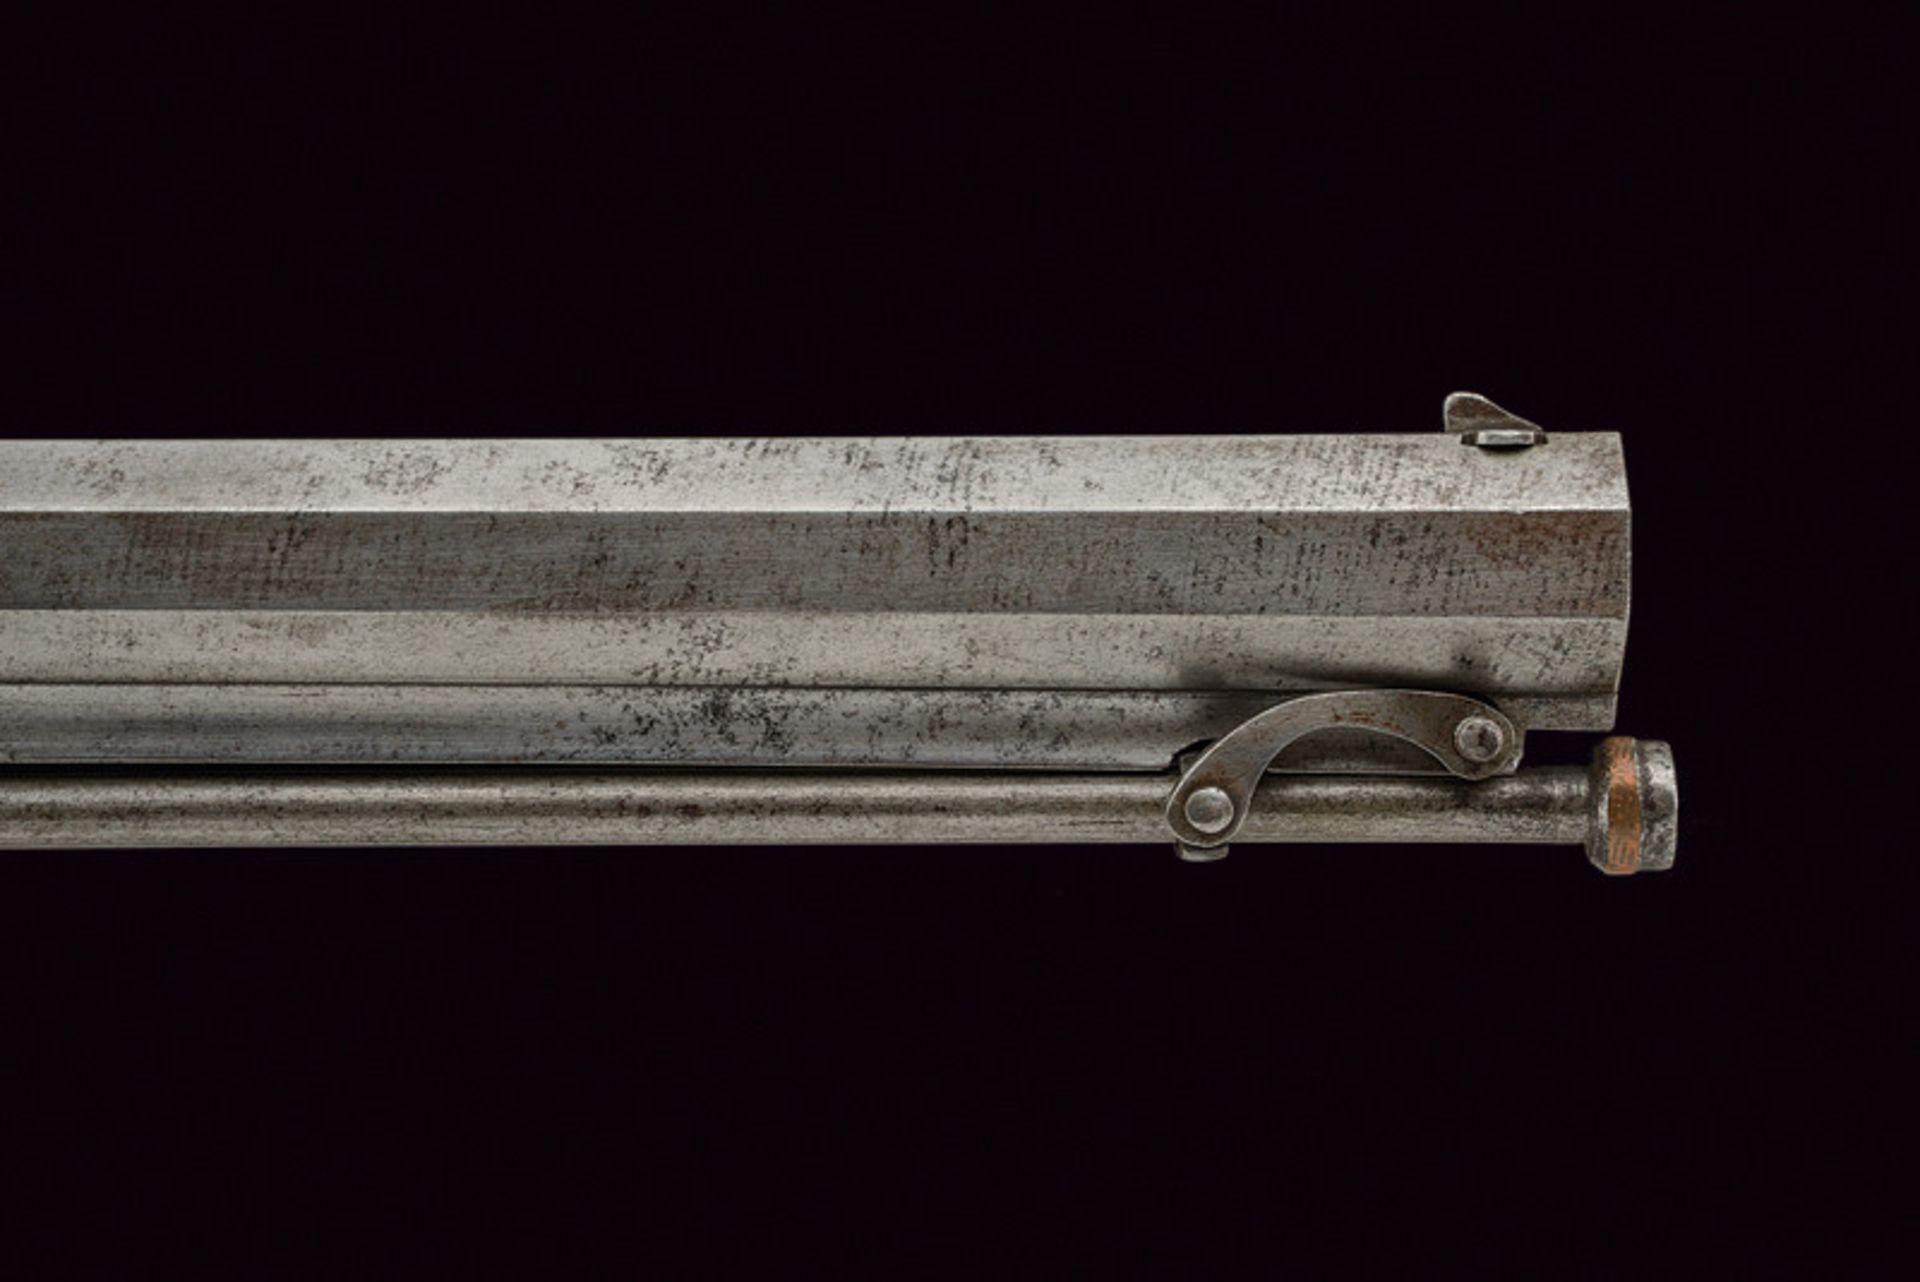 A very scarce superimposed percussion folding rifle by Mangeot at Bruxelles dating: mid-19th Century - Bild 6 aus 10